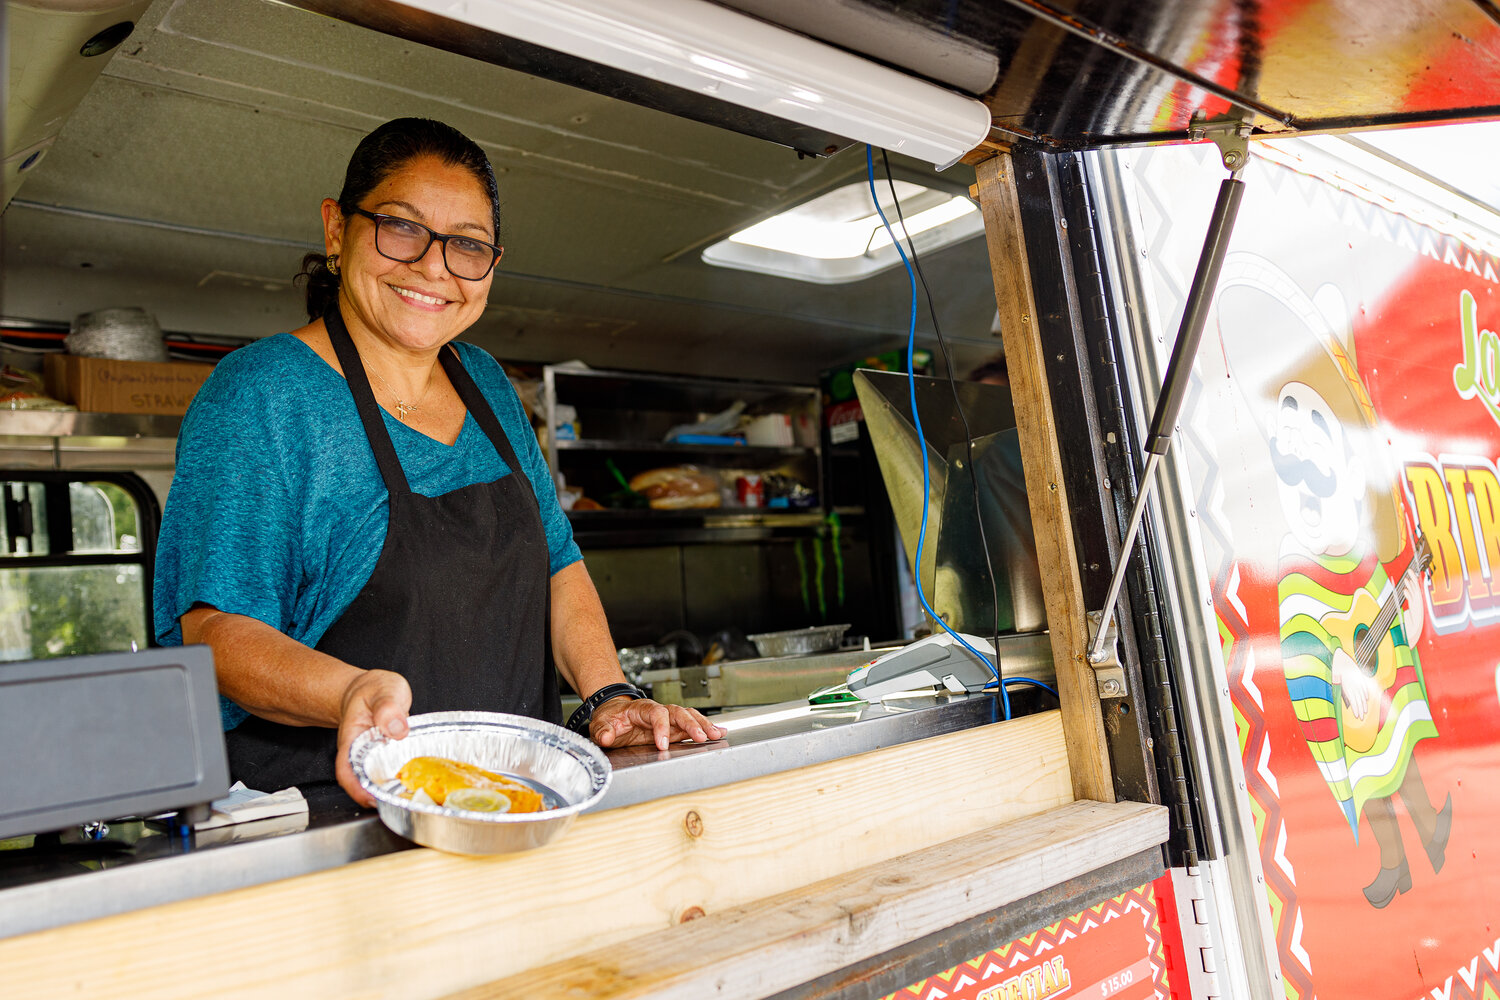 Food vendor Sofia Aguilar of Mamma Mia, a fiesta birria taco truck, serves up savory delights at the Valley Stream Hispanic Heritage Month event.